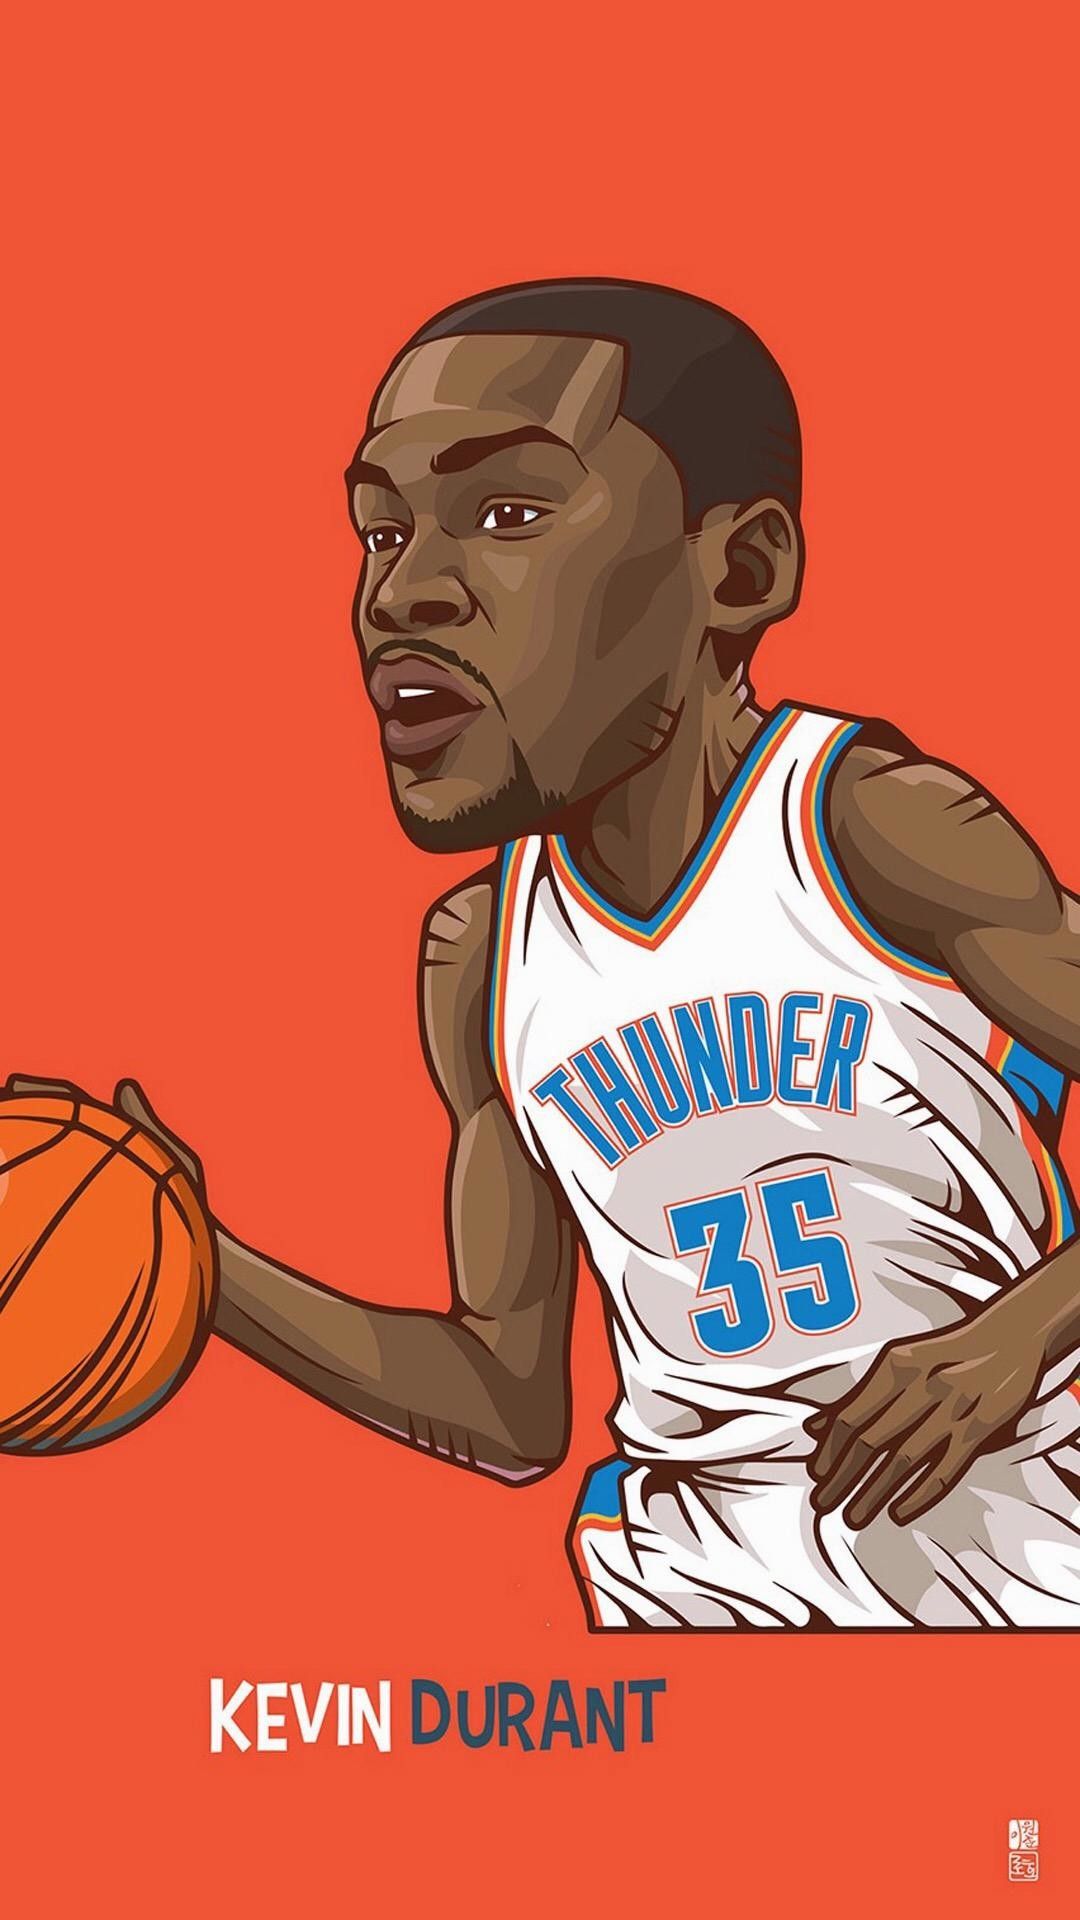 Kevin Durant Wallpaper iPhone. Kevin durant, Nba sports, Basketball picture